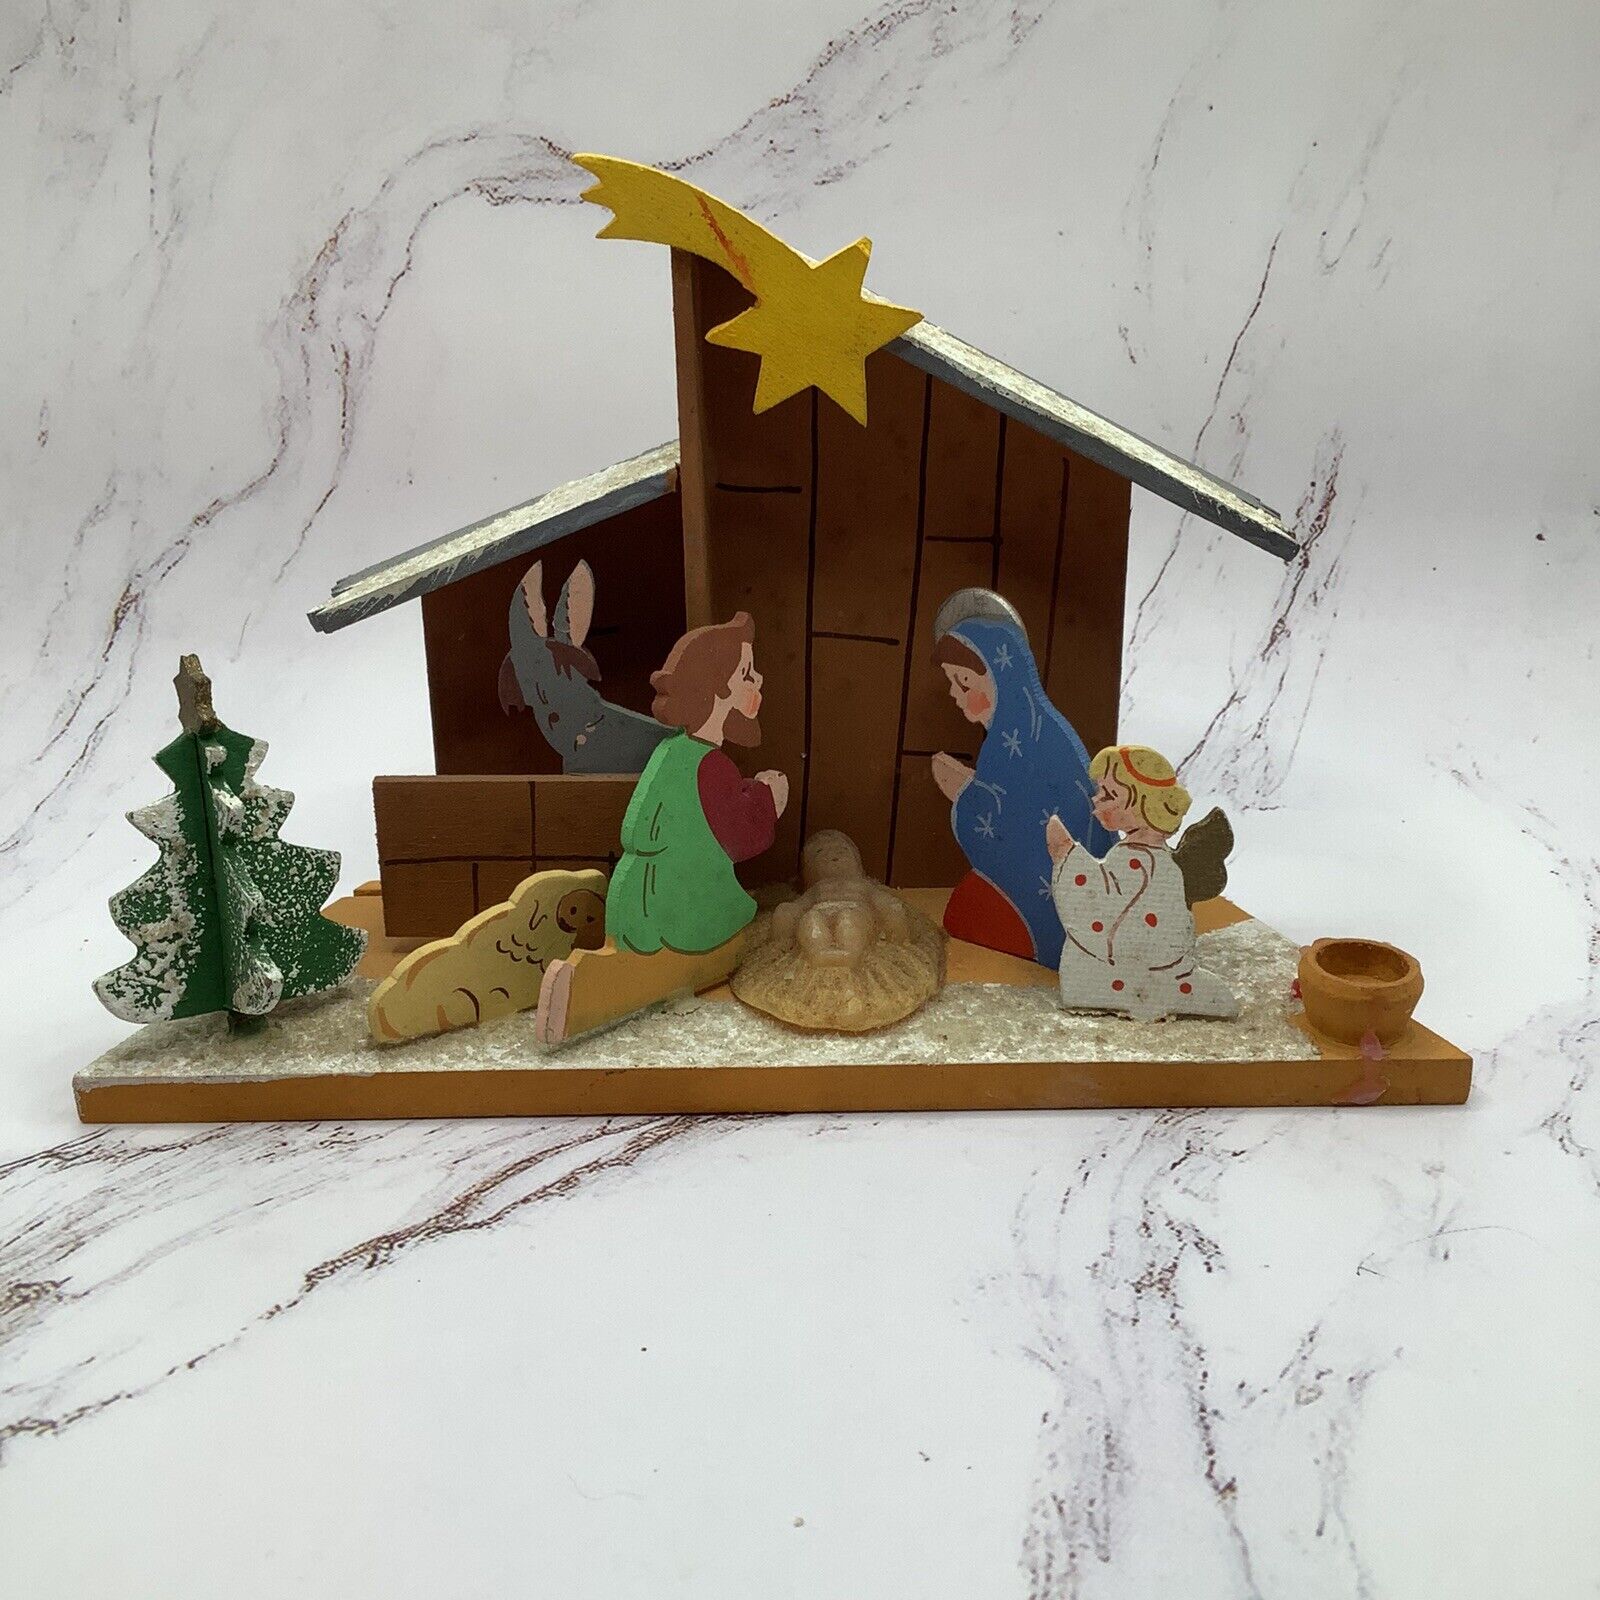 Vintage Wooden Handpainted Nativity Set Made In Western Germany 6.25” L